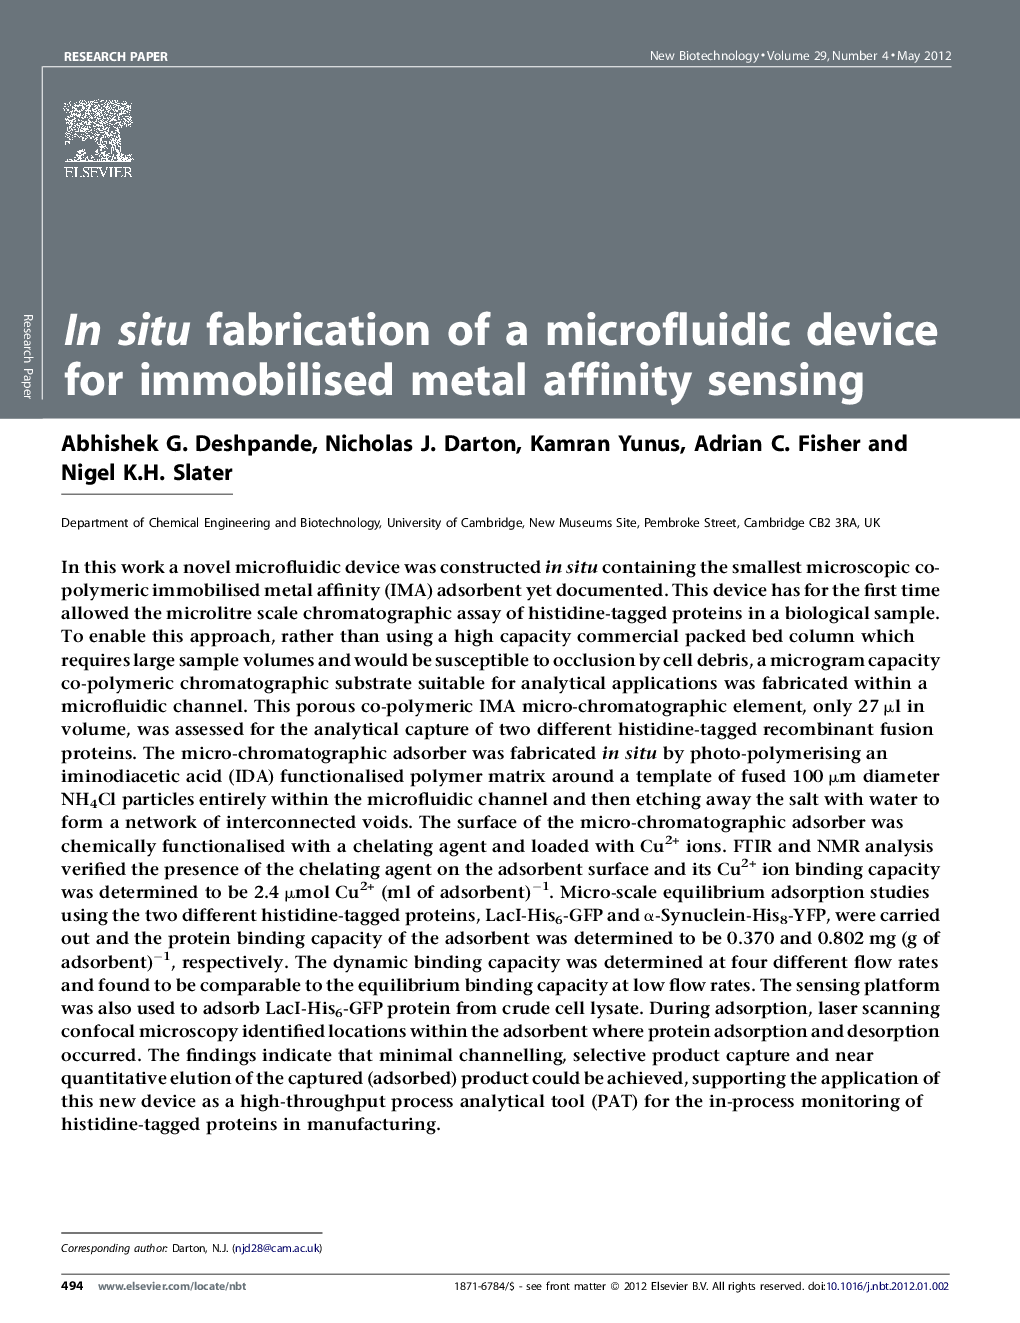 In situ fabrication of a microfluidic device for immobilised metal affinity sensing